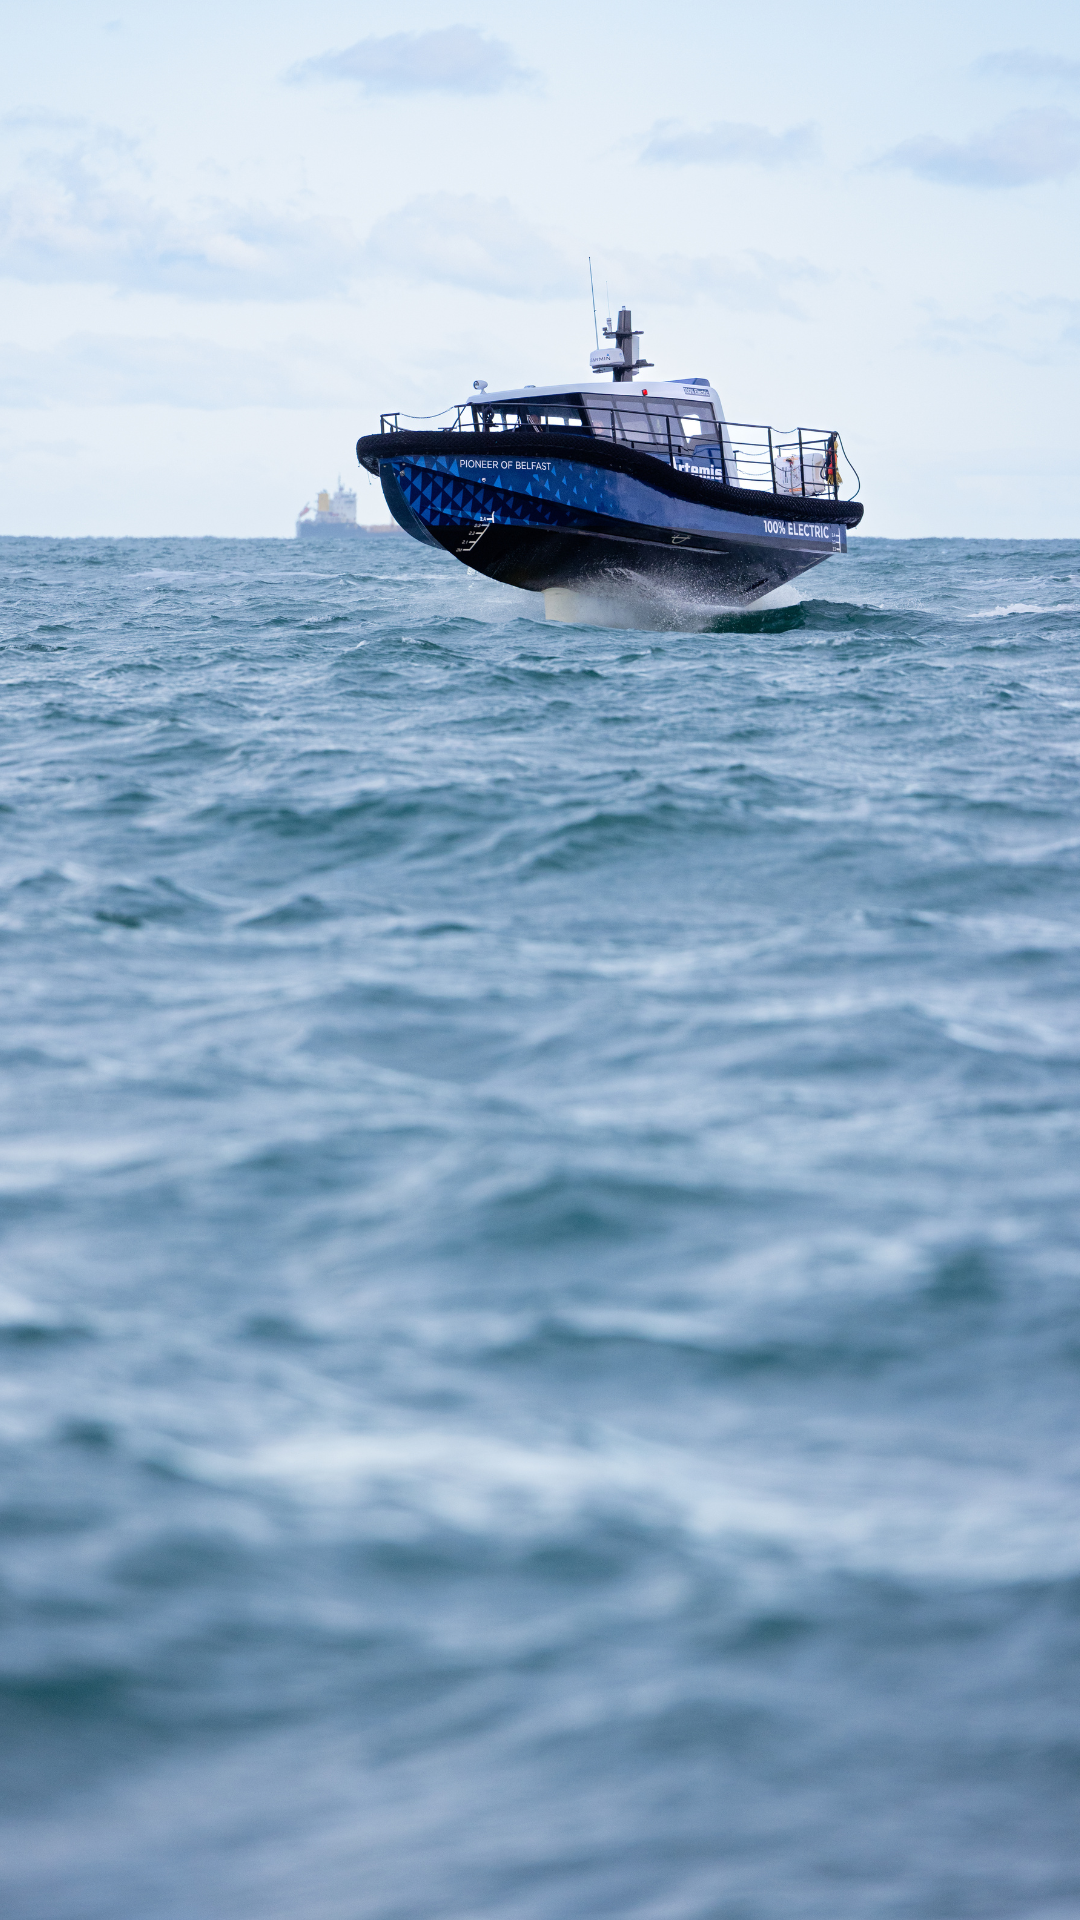 A blue foiling workboat in the sea with a ship in the background